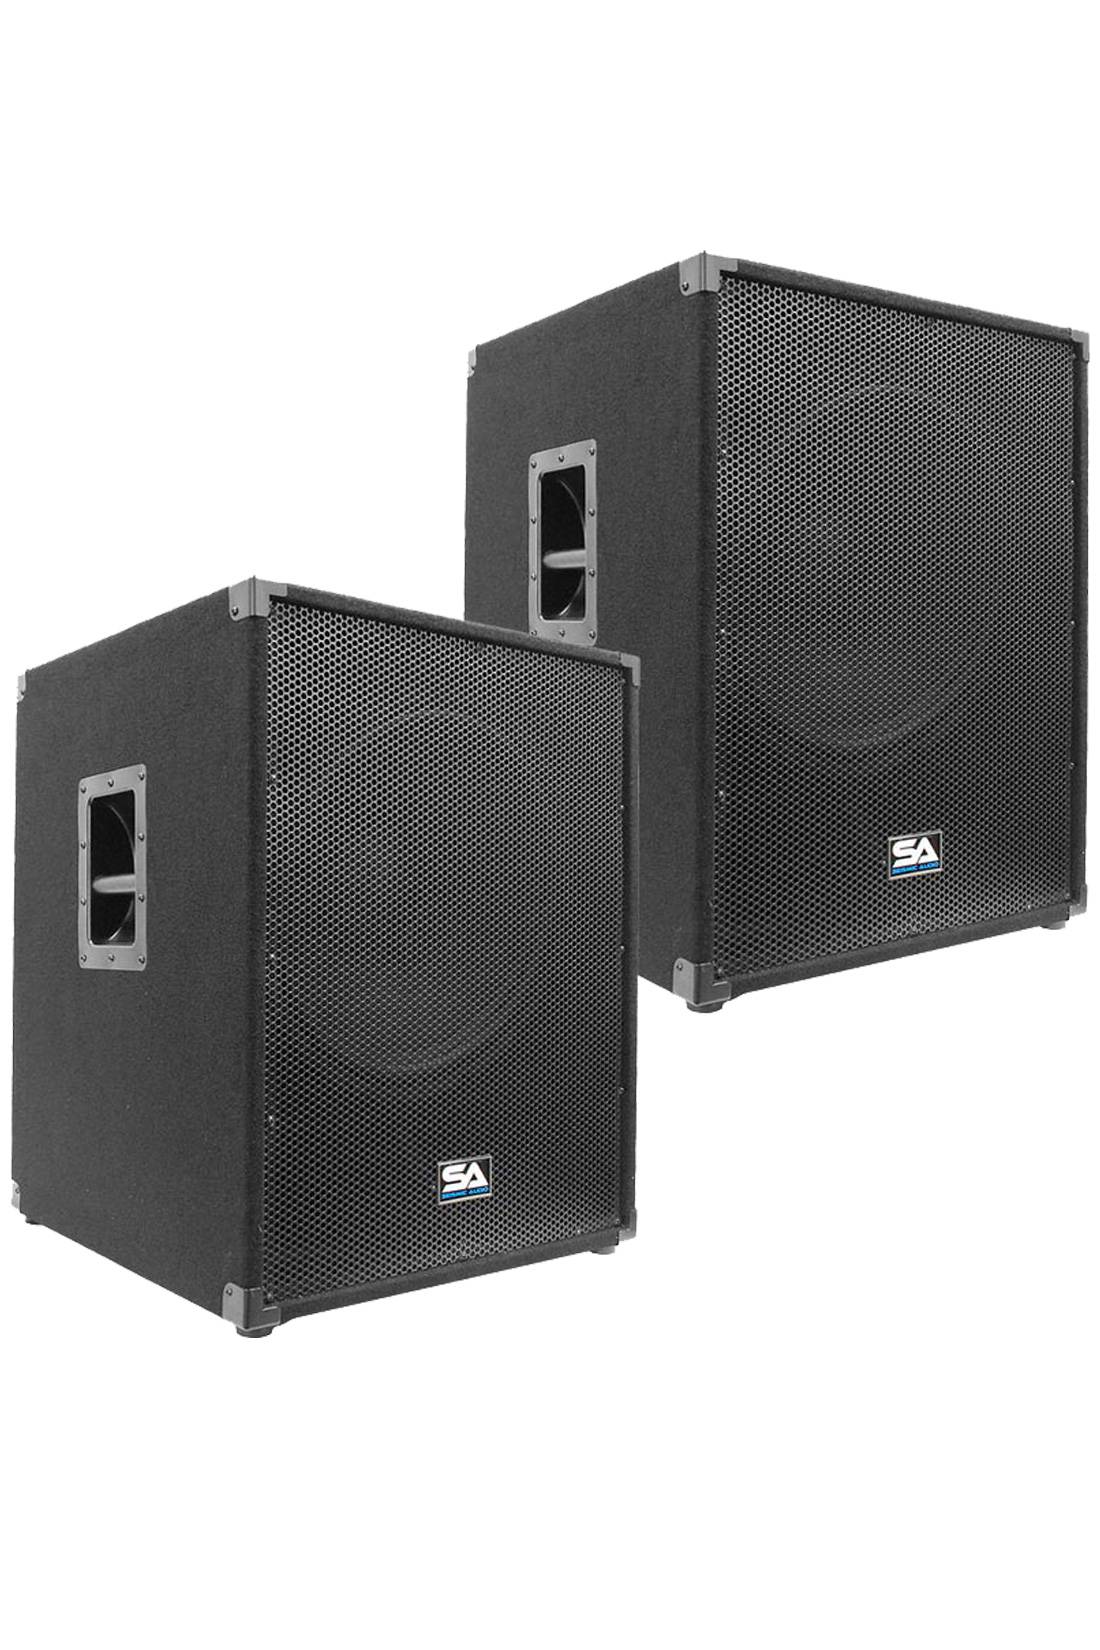 Pair of 18 Inch Subwoofer Bass Cabinets - 800 Watts RMS Each | Powered 18 Inch Sub Cabs | Powered 18 sub woofers | Powered 18 sub | Power | Active 18 Inch Subwoofer Pair | Pair of 18 Inch – Seismic Audio